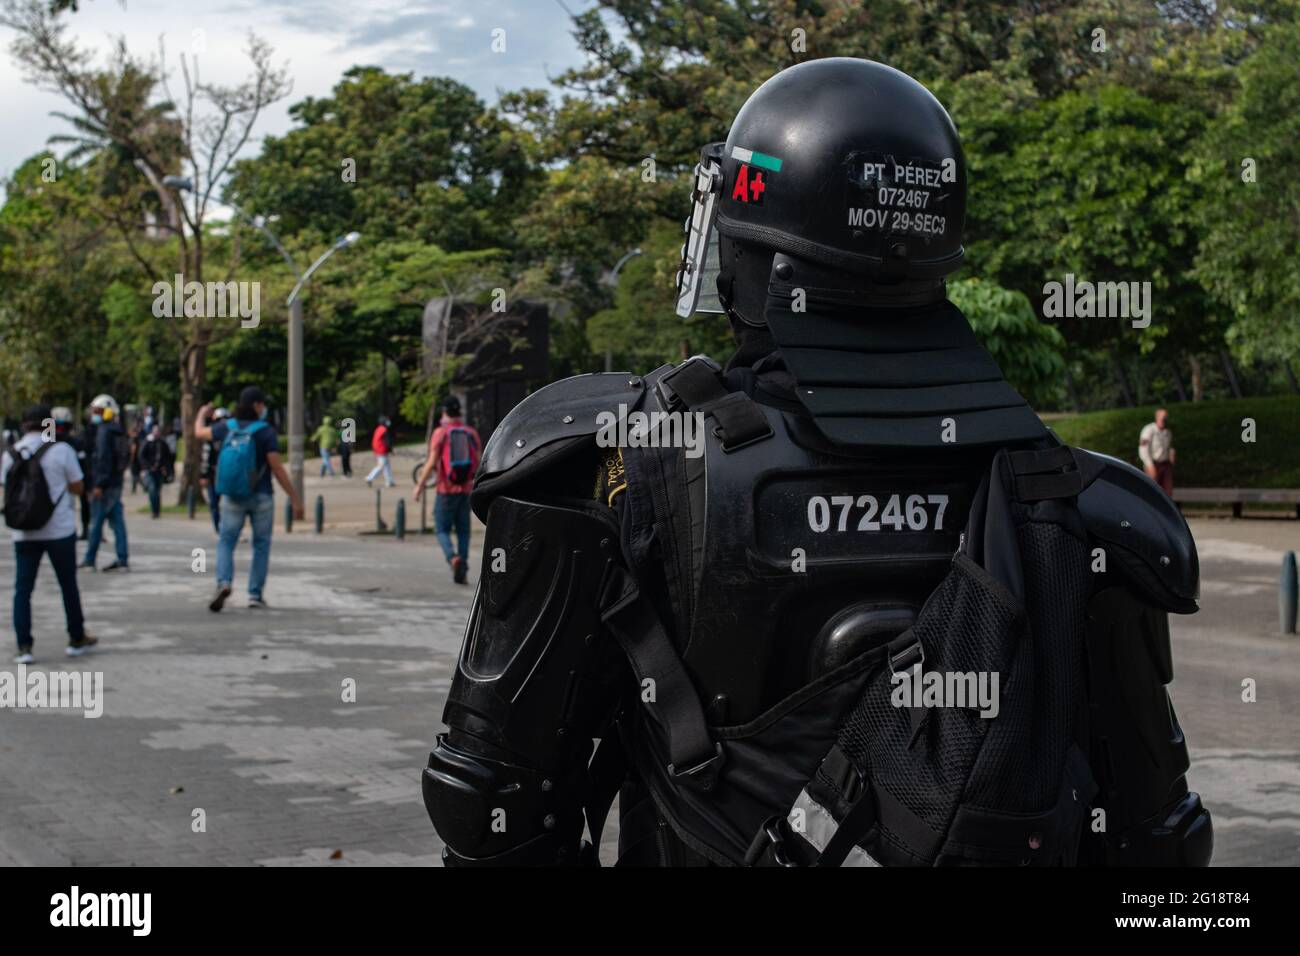 A Colombian Riot Police (ESMAD) officer seen from the back as clashes between demonstrators and Colombia's riot police (ESMAD) erupt in Medellín, Colombia after several weeks of anti-government protest against President Ivan Duque's tax and health reforms and unrest and abuse of authority cases that leave at least 70 dead according to NGOs on June 4, 2021. Stock Photo